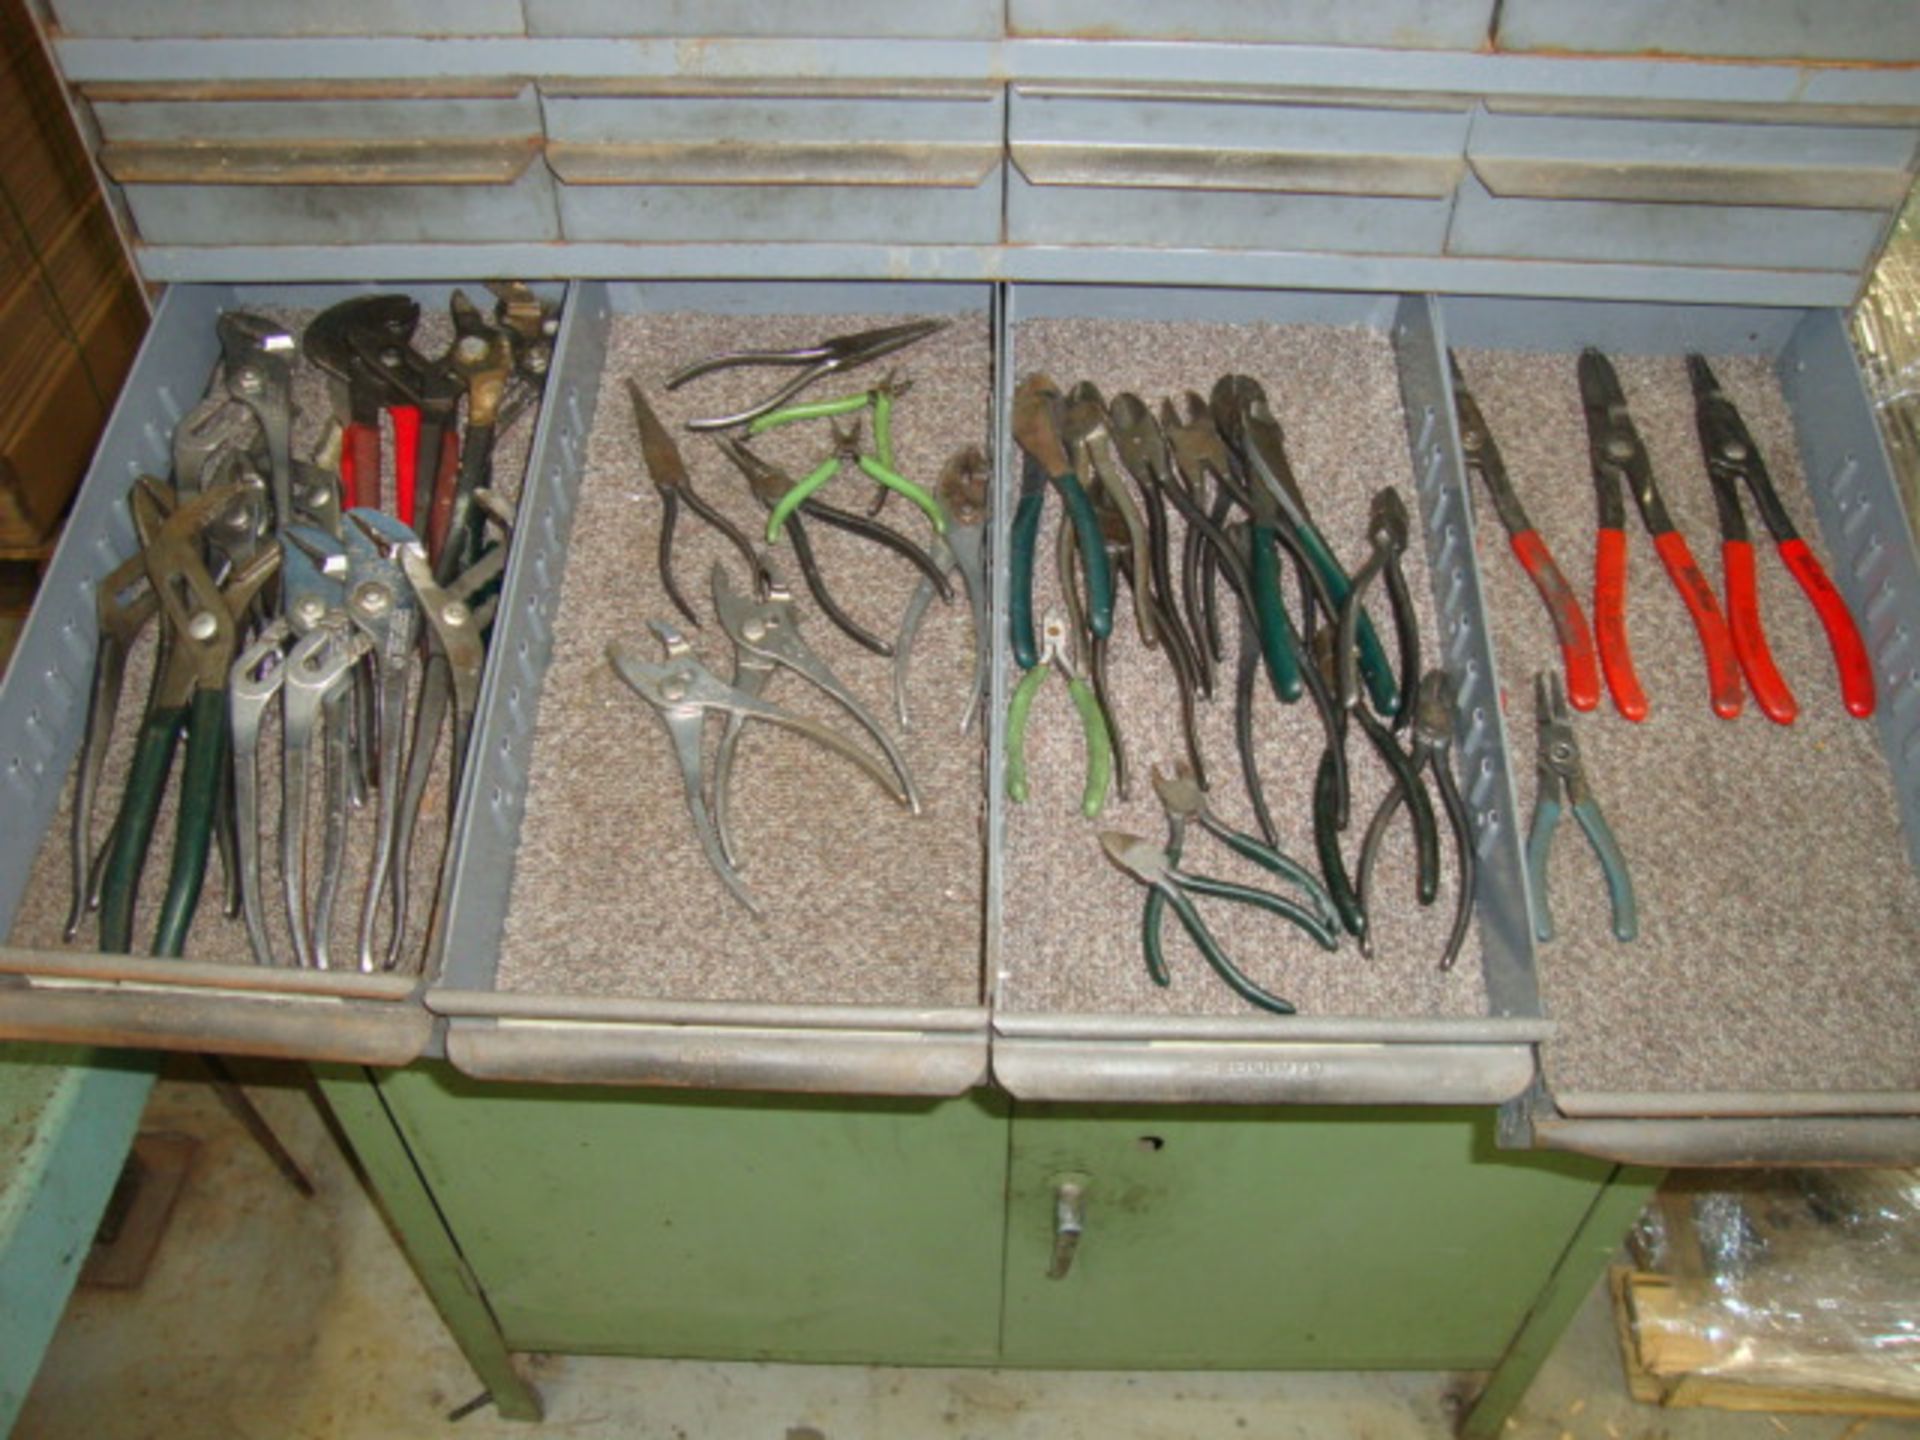 Large Lot of Adjustable Pliers, Wire Cutters, Snap Ring Pliers, etc. NOTE-Tools Only- No Drawers